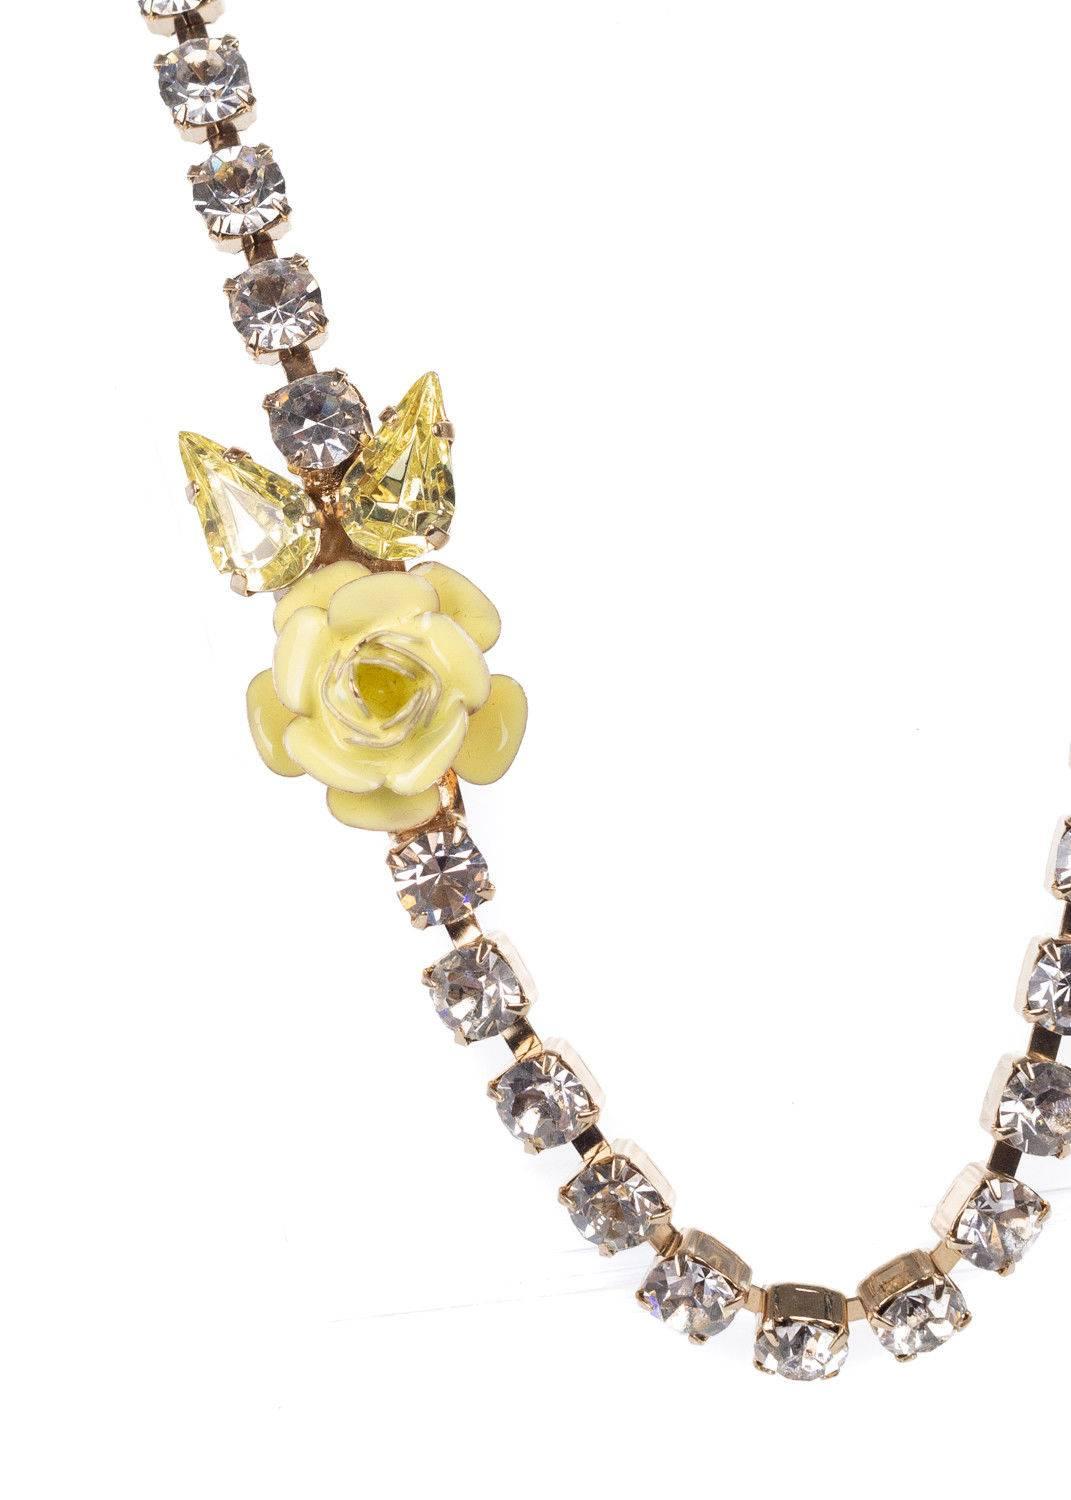 Start your spring off right with your Roberto Cavalli Stone Necklace. This necklace features a yellow enameled floral jeweled applique, light gold tone base, and chiseled swarovski crystals. You can pair this necklace with a yellow shift dress and